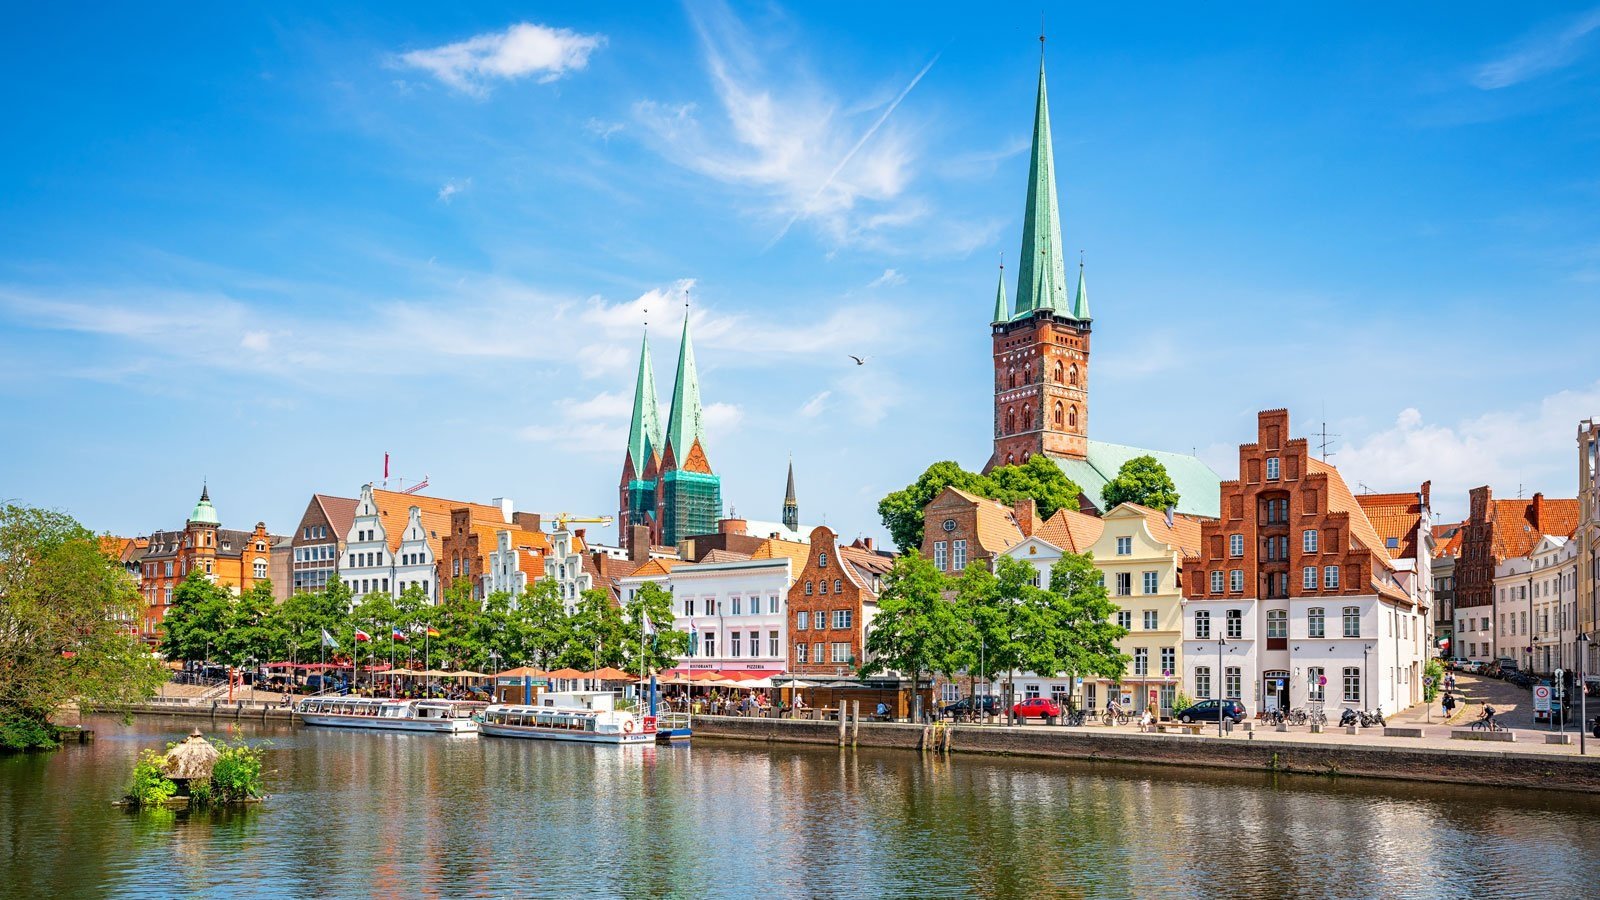 Lübeck's Gothic churches, merchants' houses and dockyard warehouses, testament to its medieval maritime glory